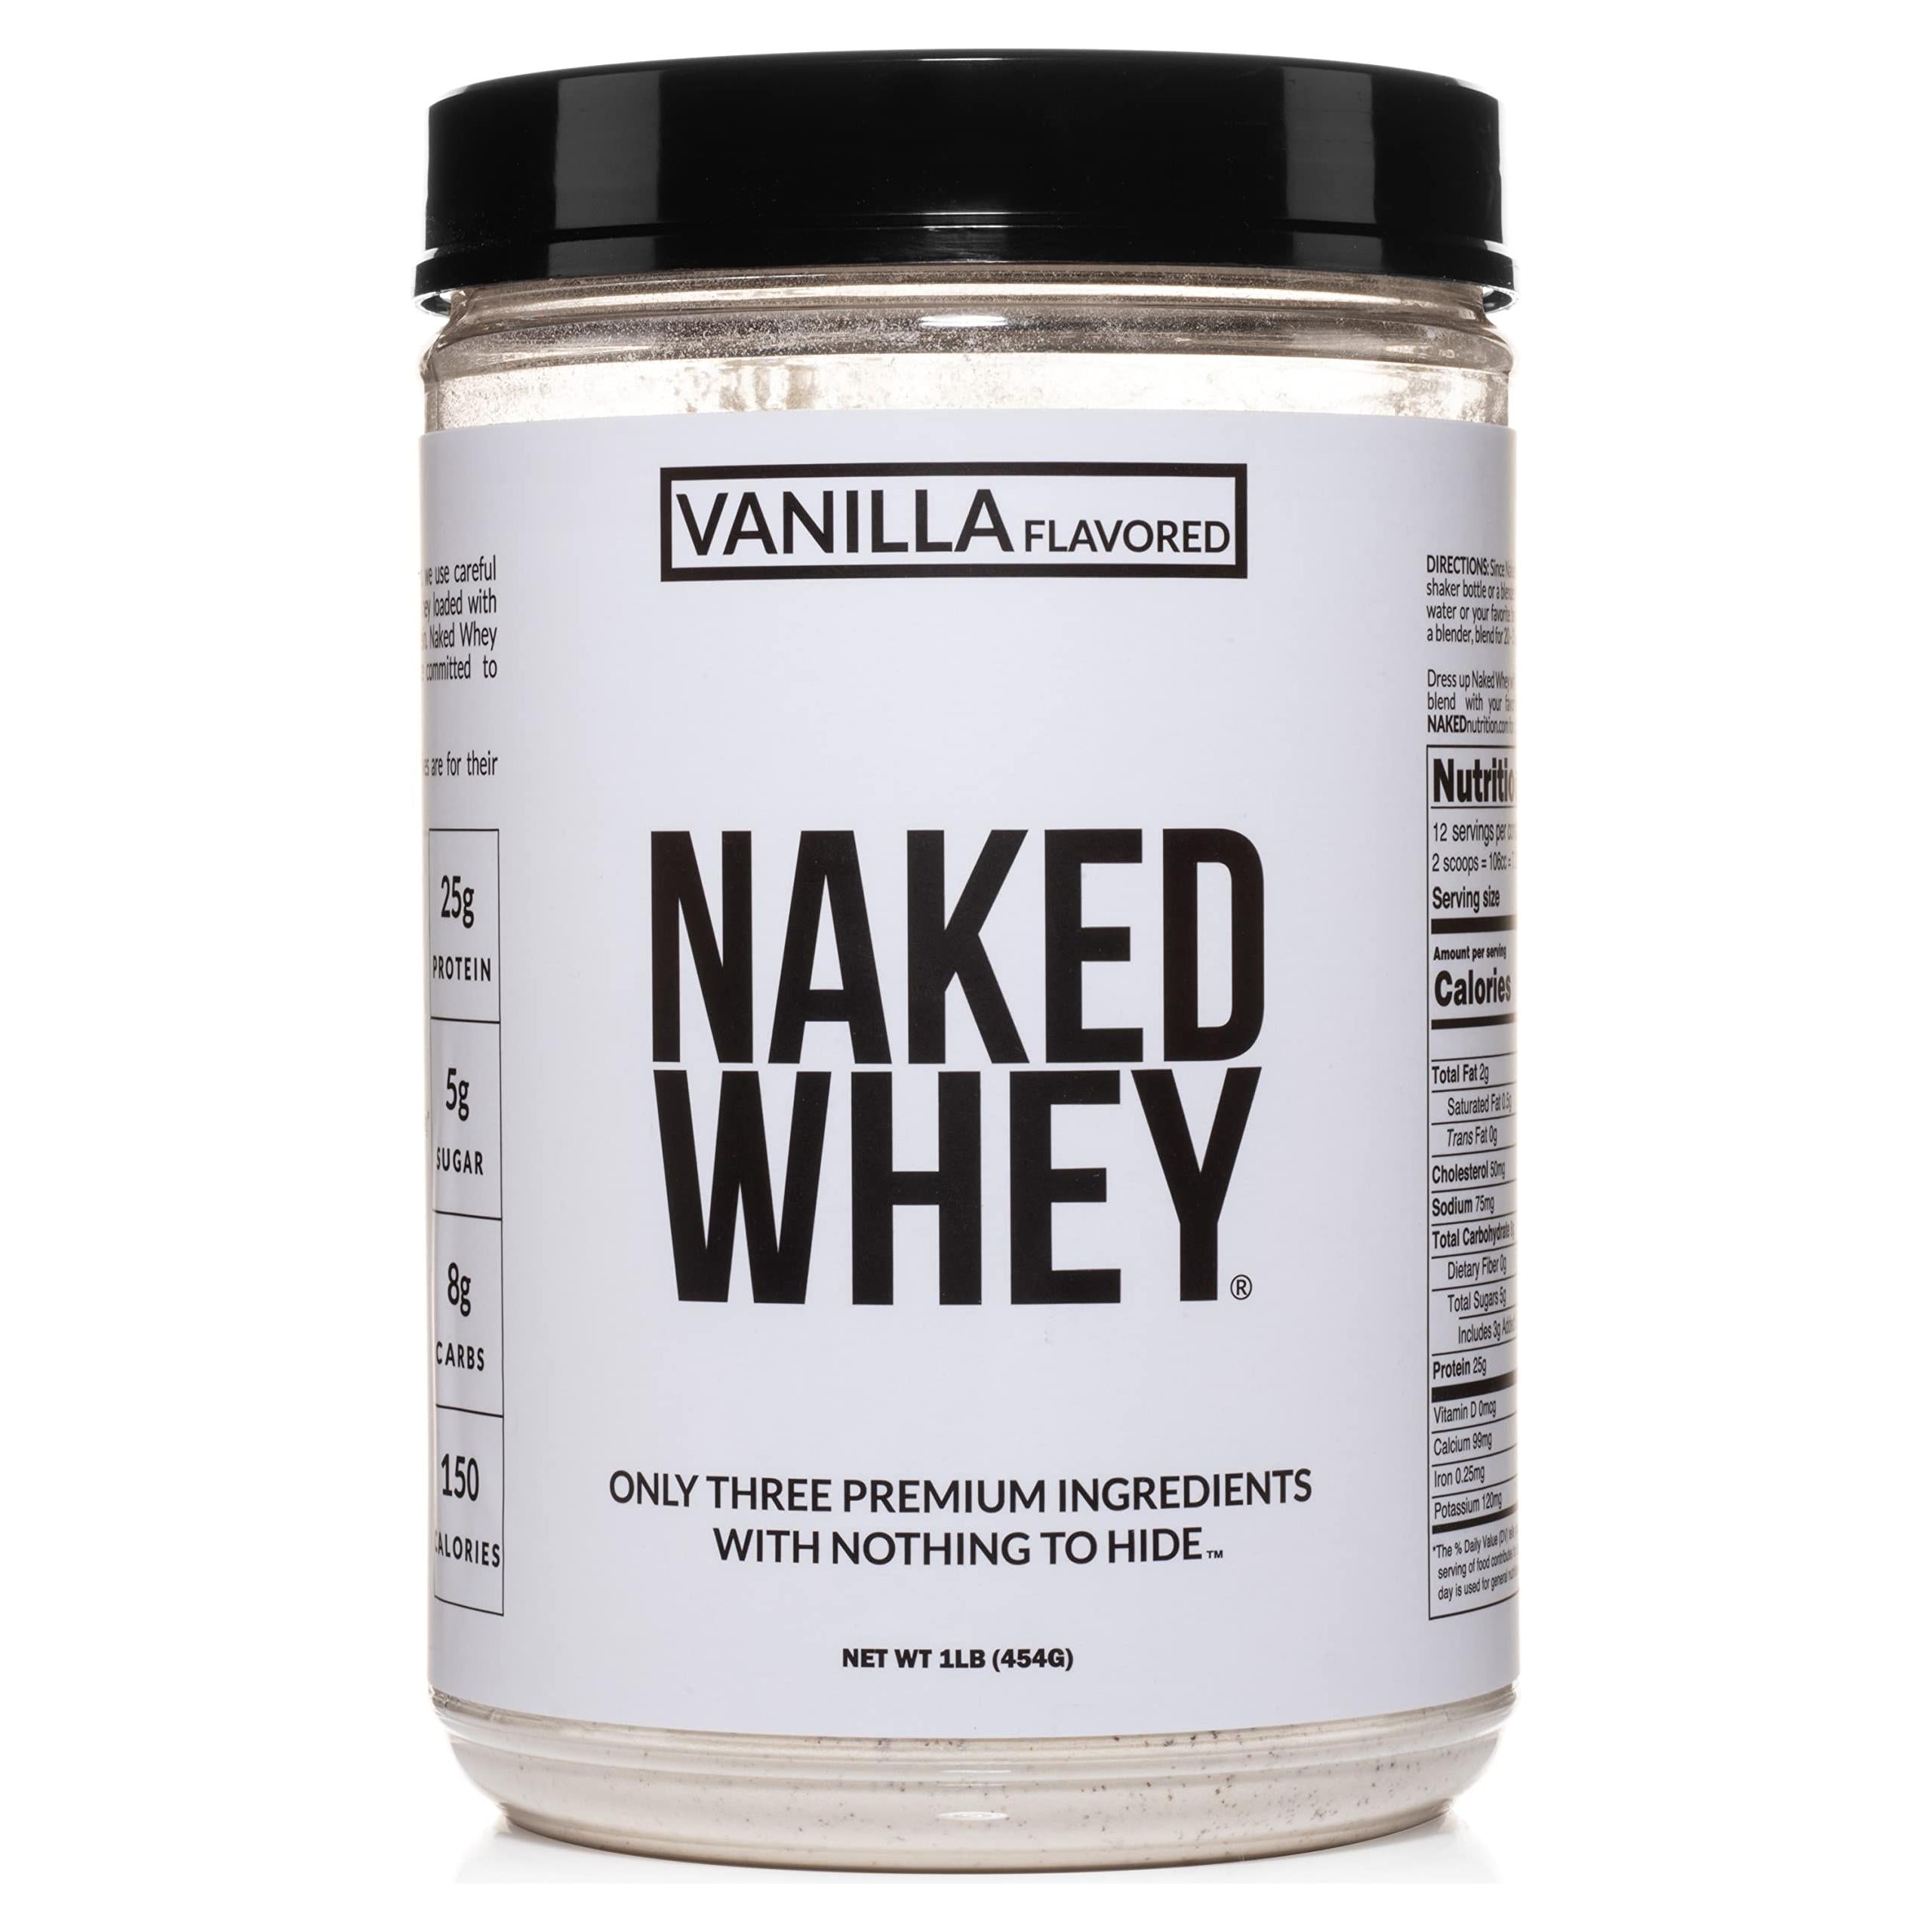 Naked Vanilla Whey Protein 1LB - Only 3 Ingredients, All Natural Grass Fed Whey Protein Powder + Vanilla + Coconut Sugar- GMO-Free, Soy Free, Gluten Free. Aid Muscle Growth &amp; Recovery - 12 Servings